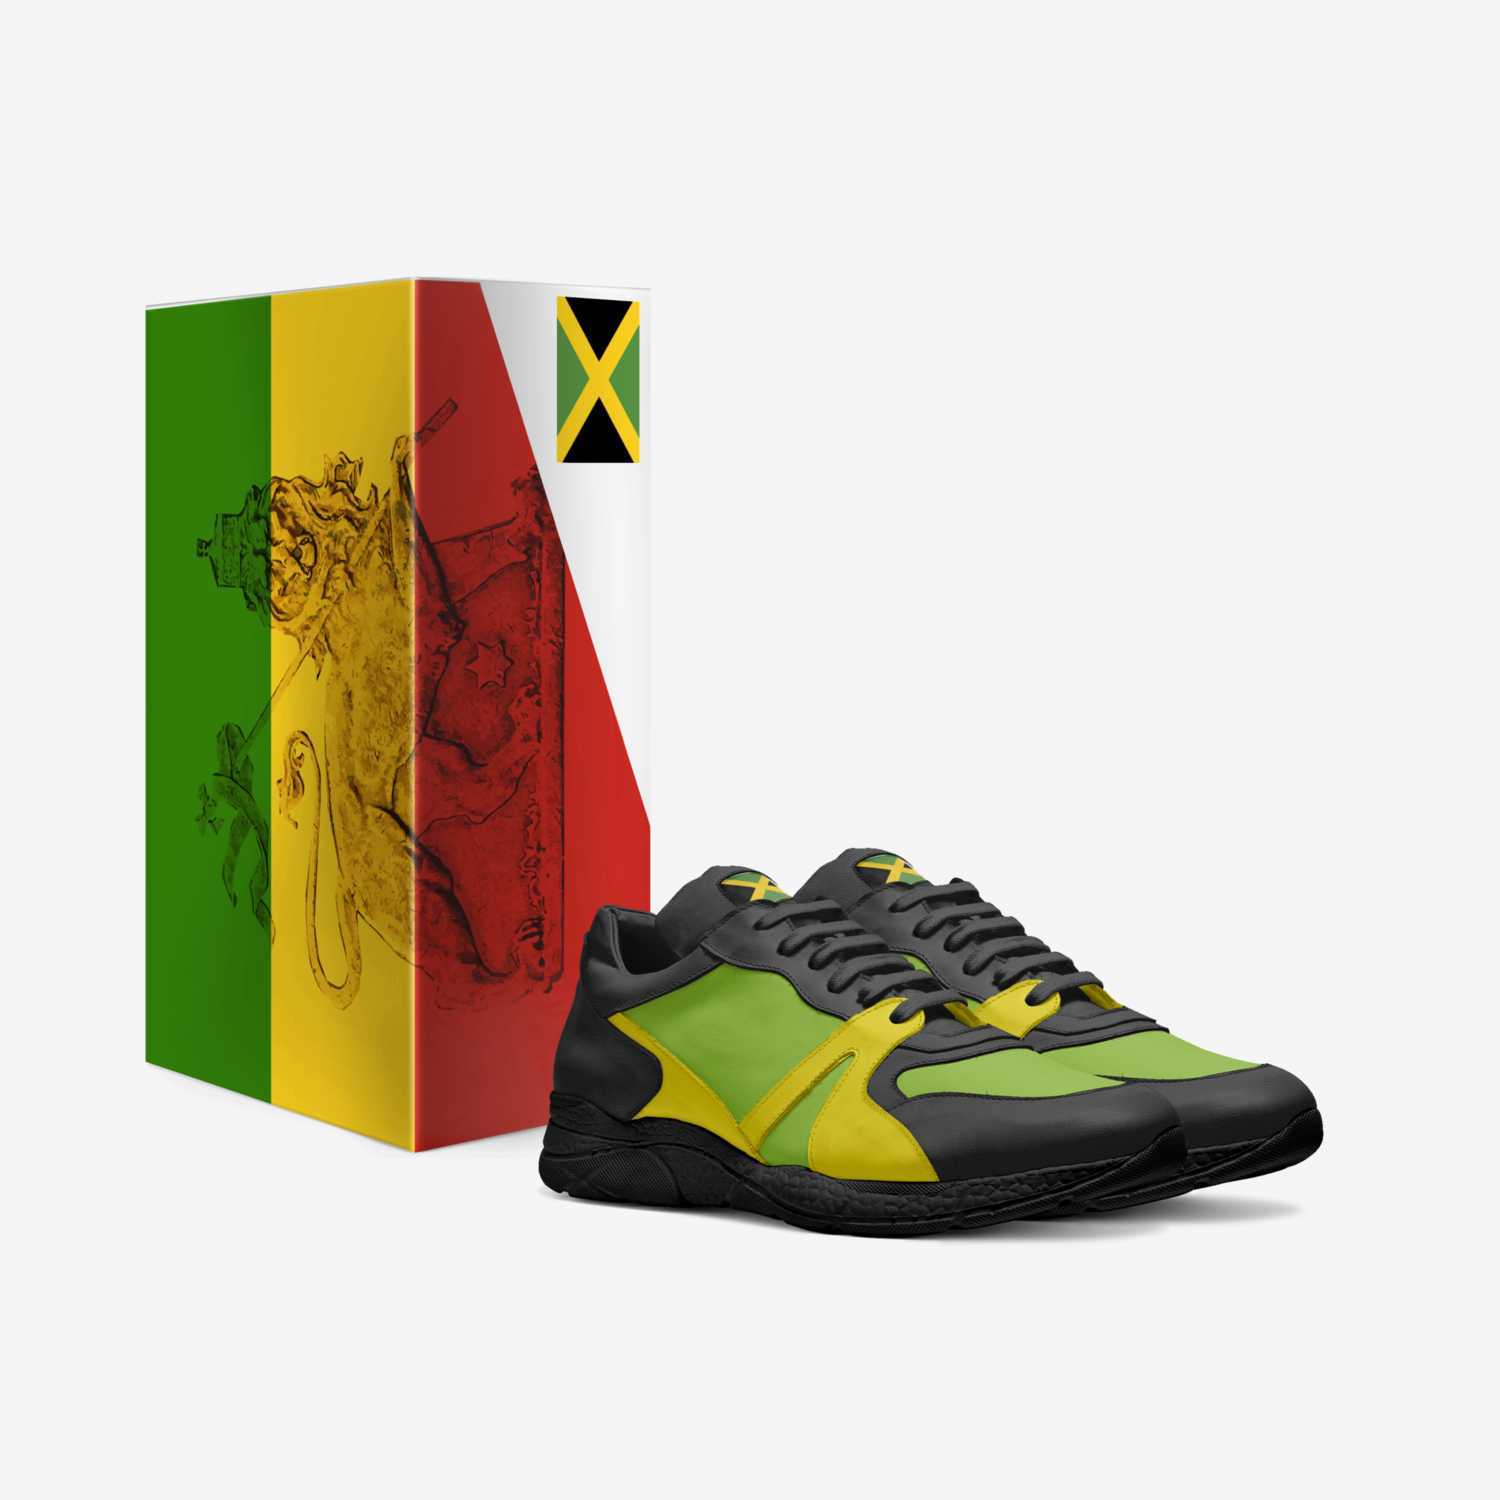 Jamaica Blue custom made in Italy shoes by Rasta Gear Shop | Box view